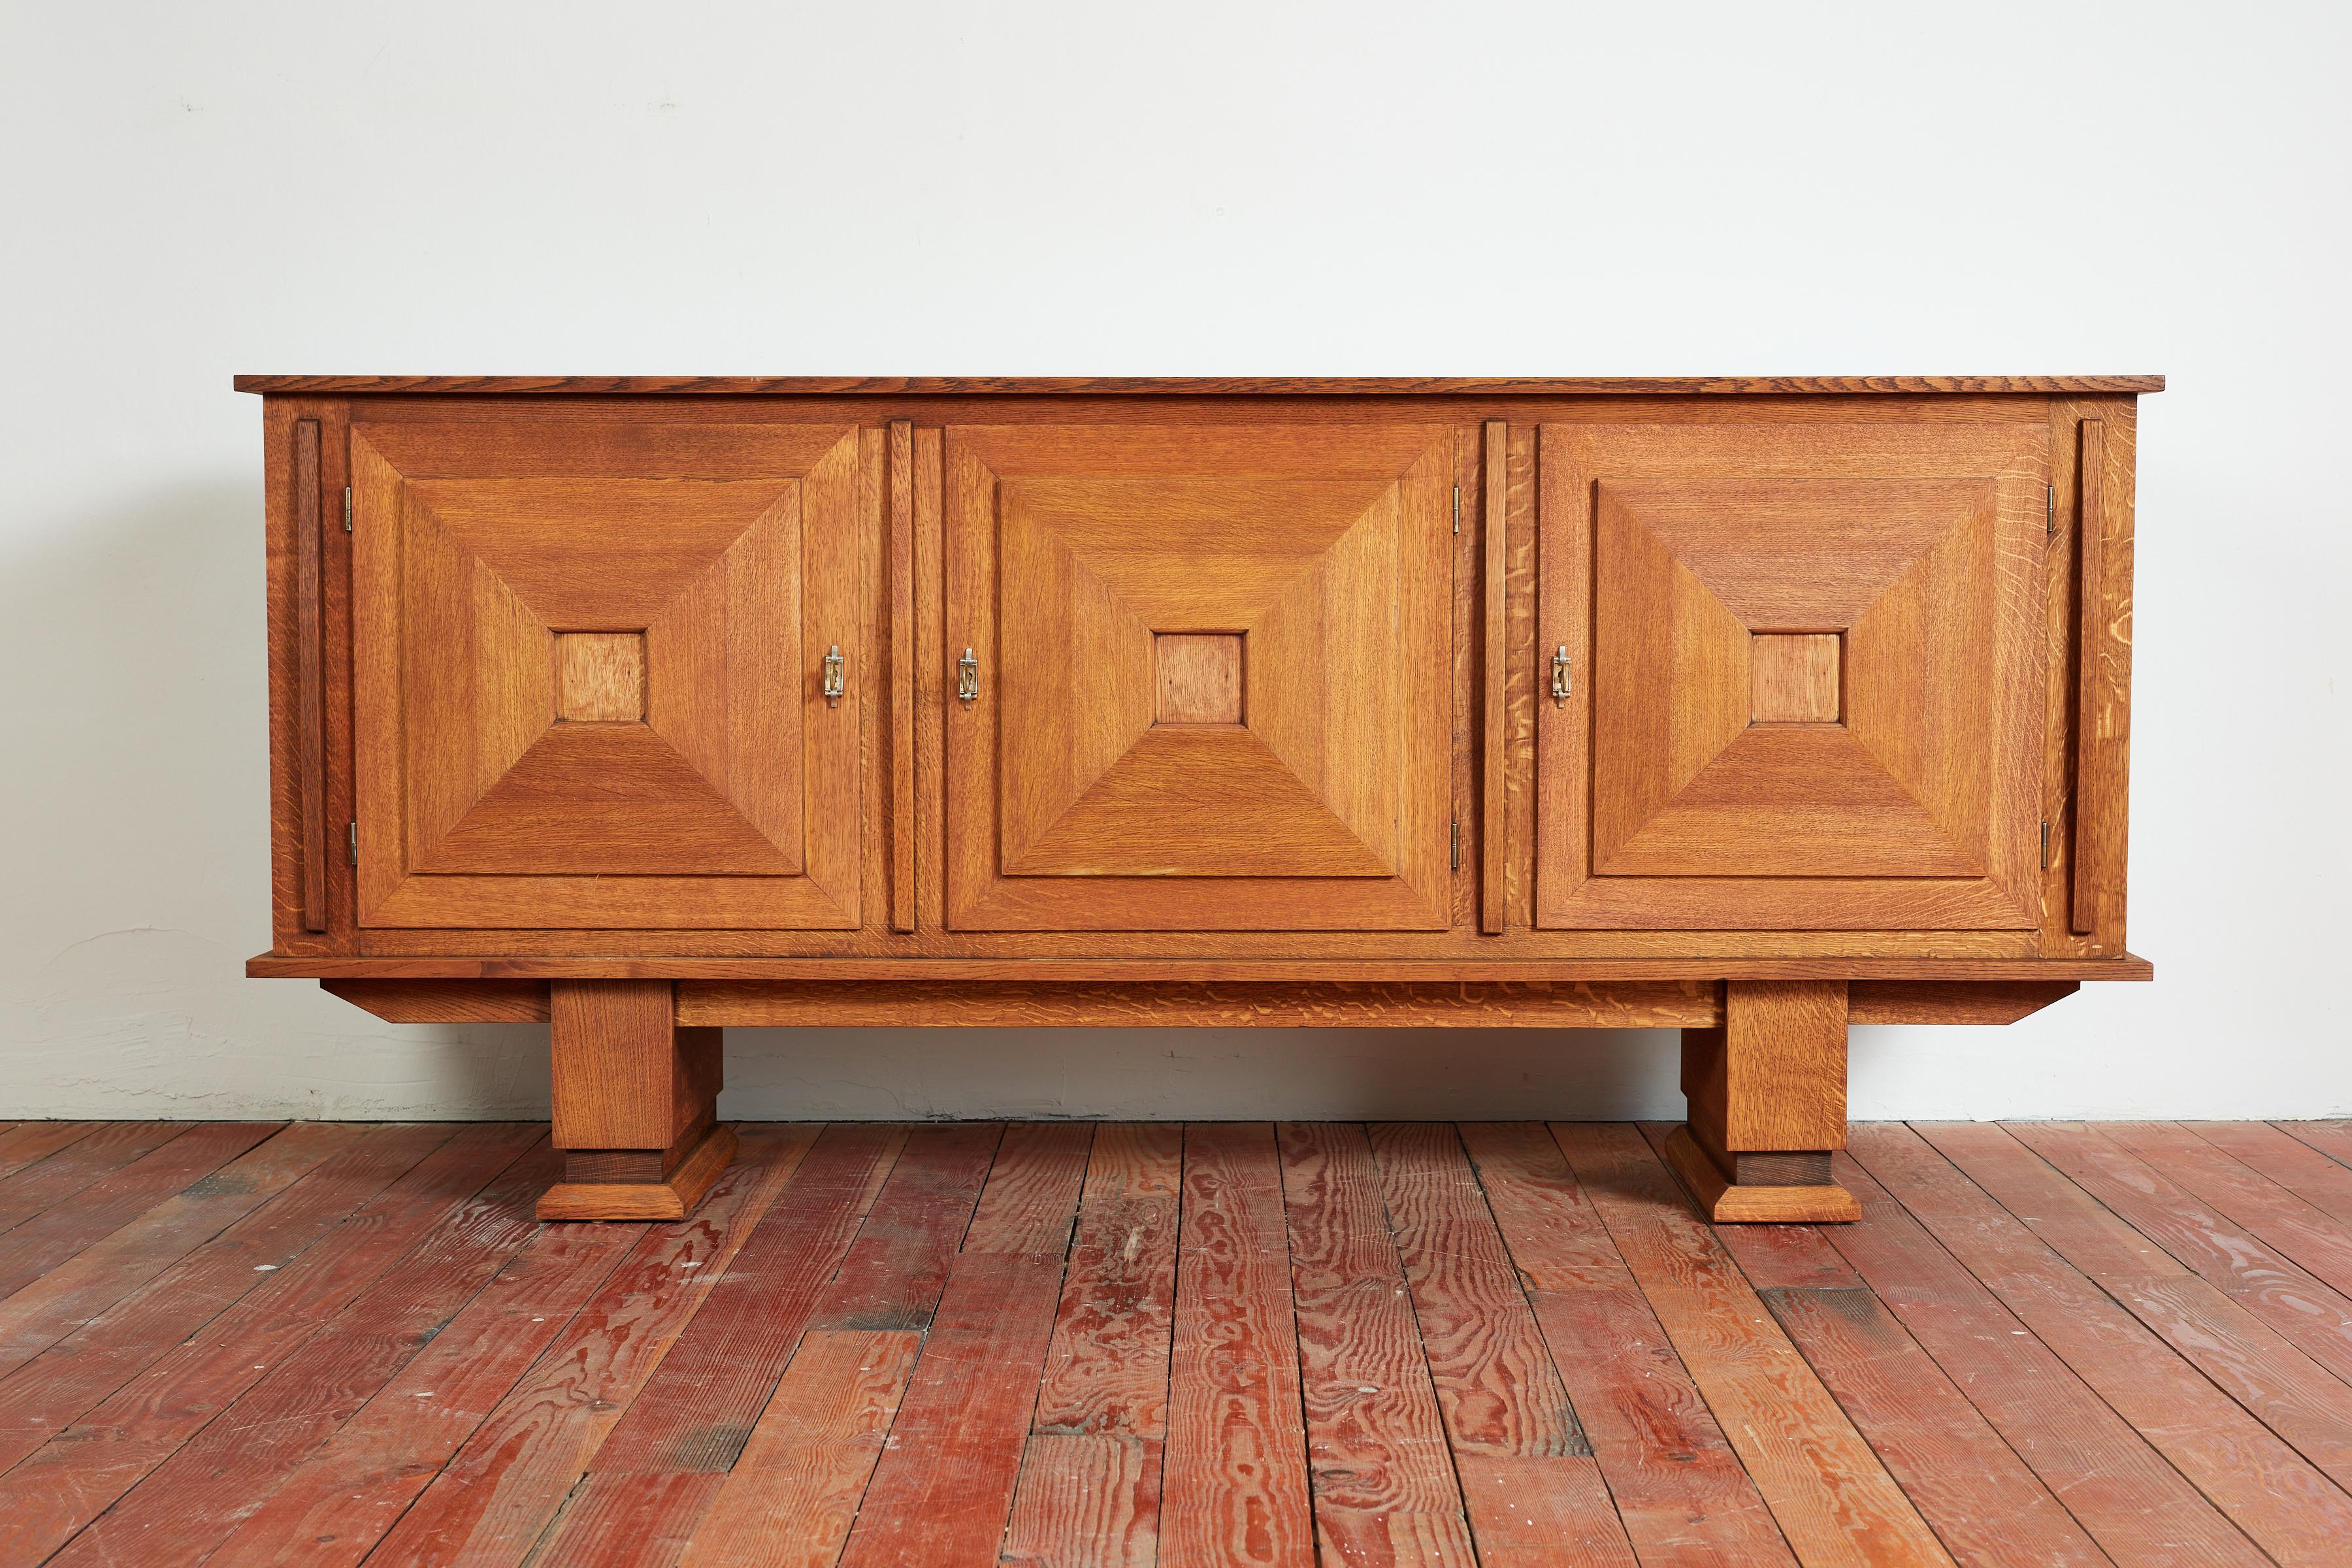 Simple oak sideboard with clean linear lines - France, 1940s
3 individual doors to open shelving with inlay detail and small drawers on both sides. 
Wonderful patina and checkerboard patterned top.